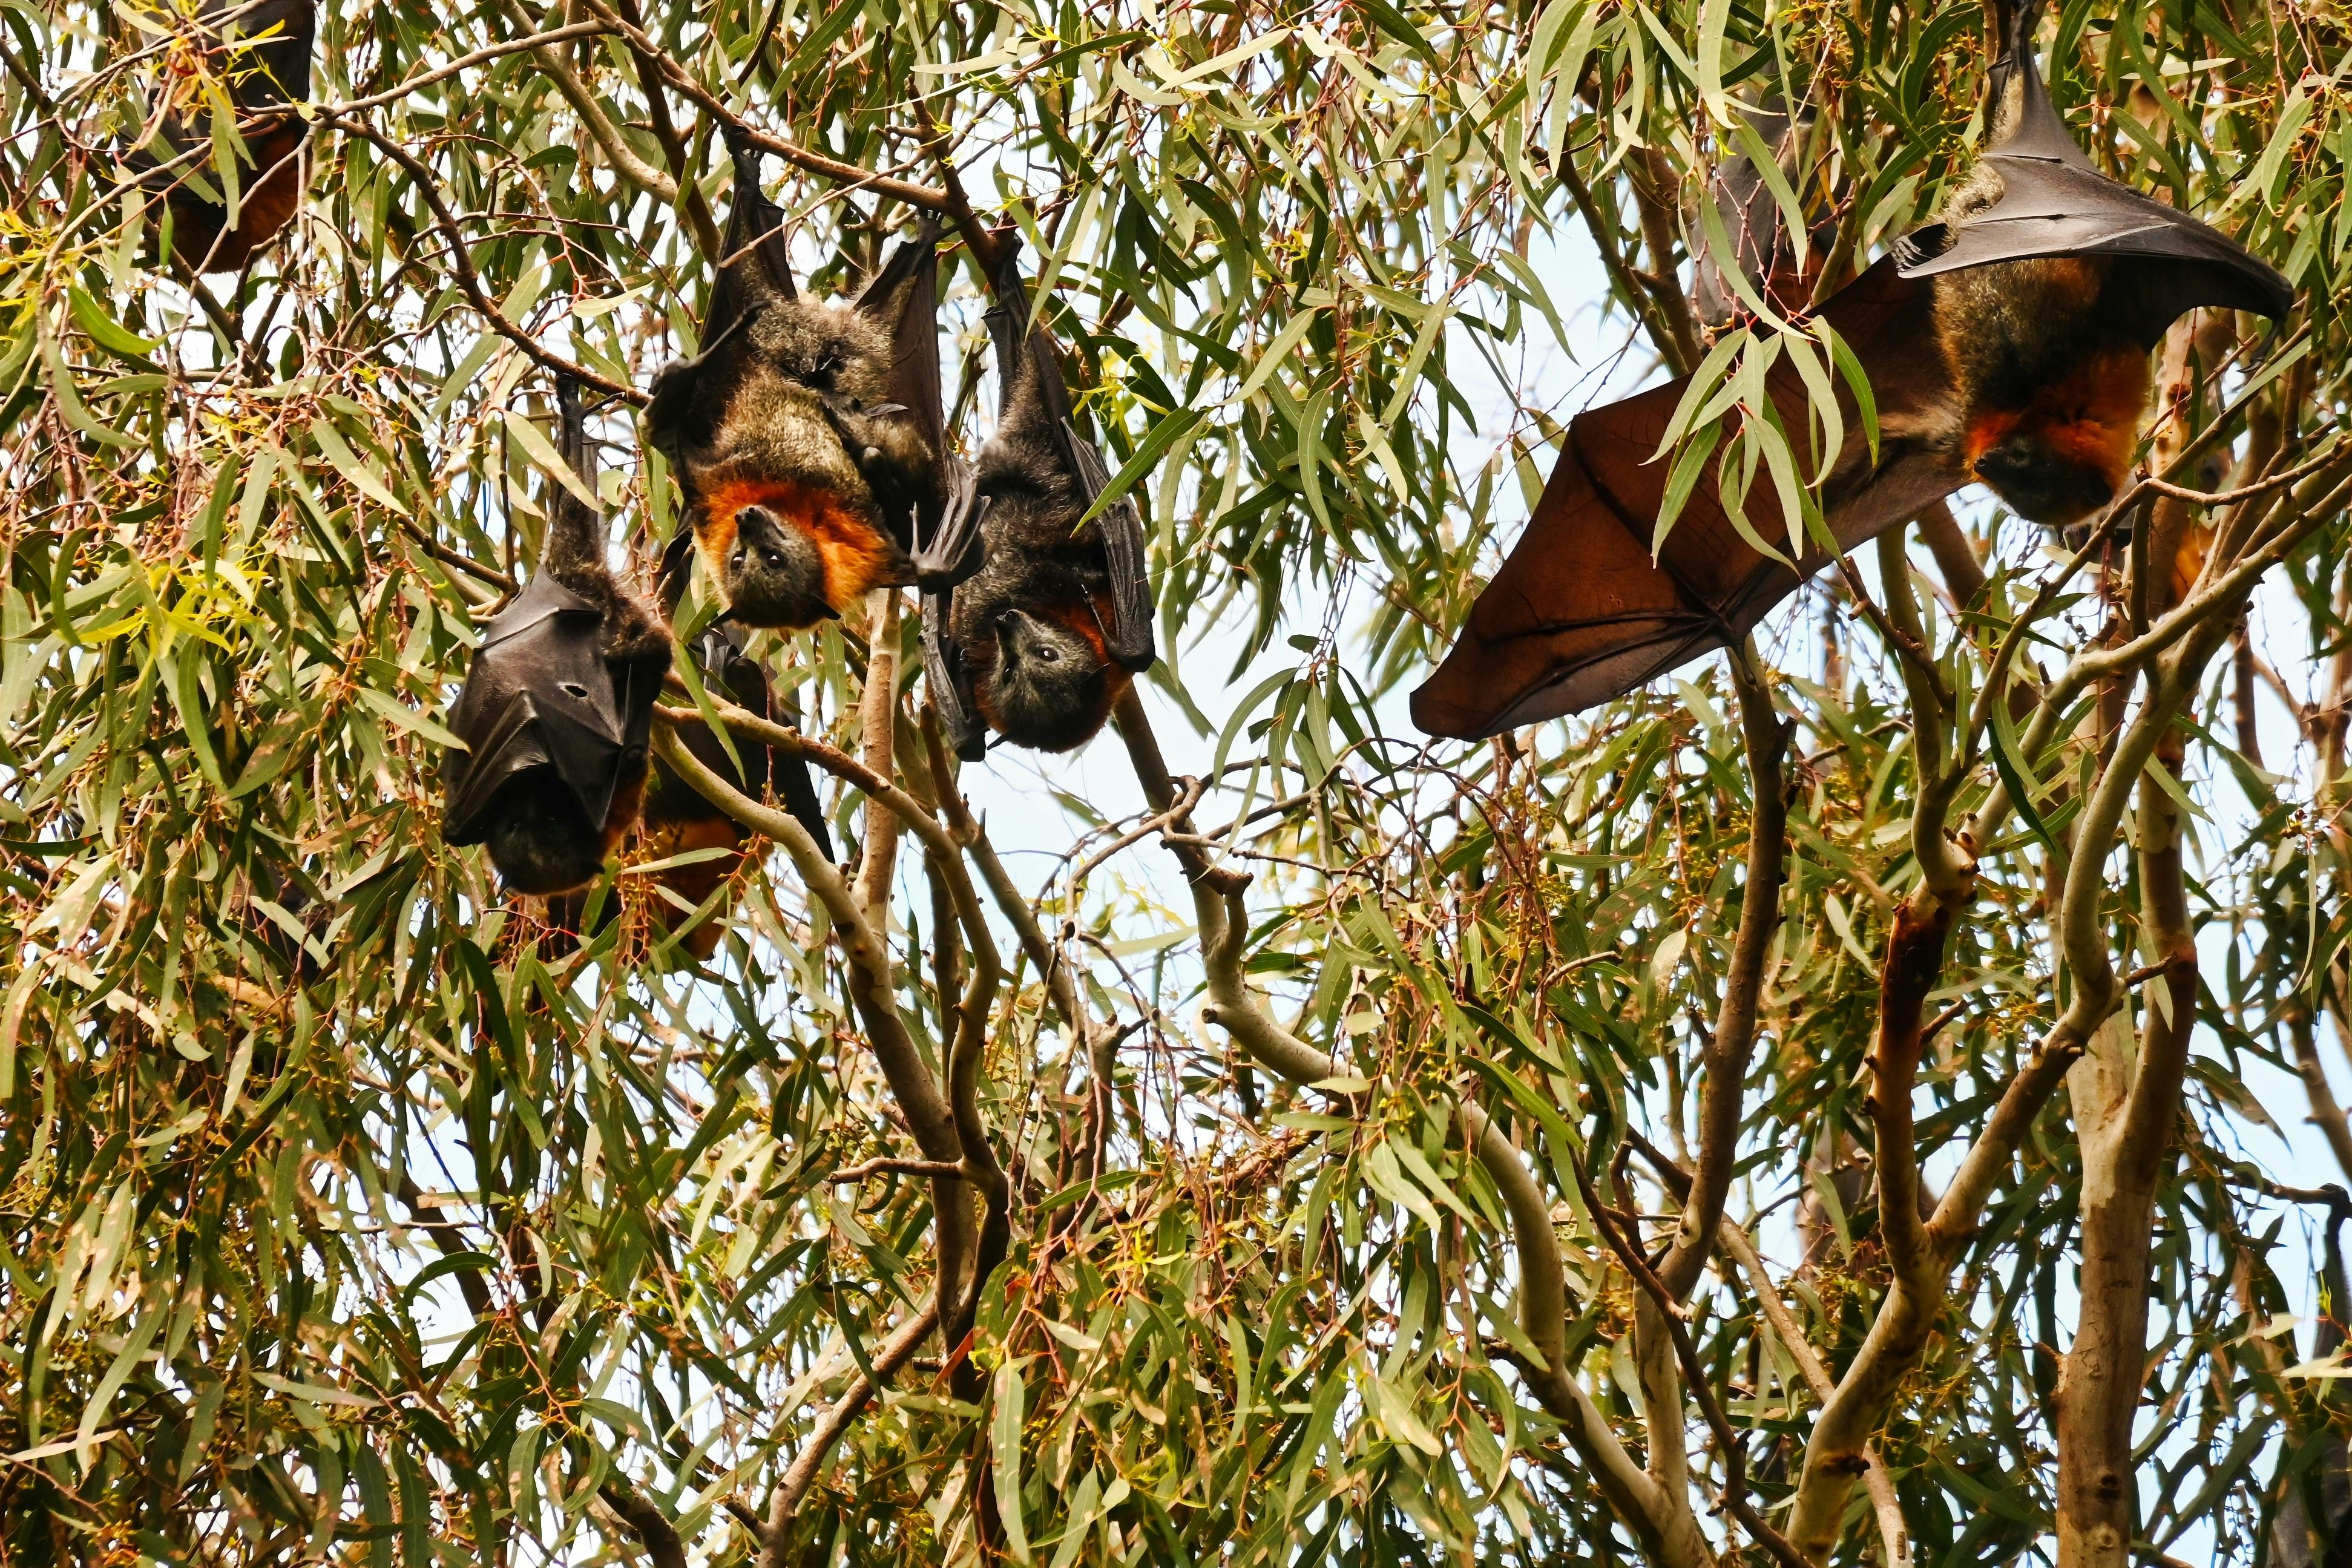 Image of some Flying Foxes in eucalypt trees